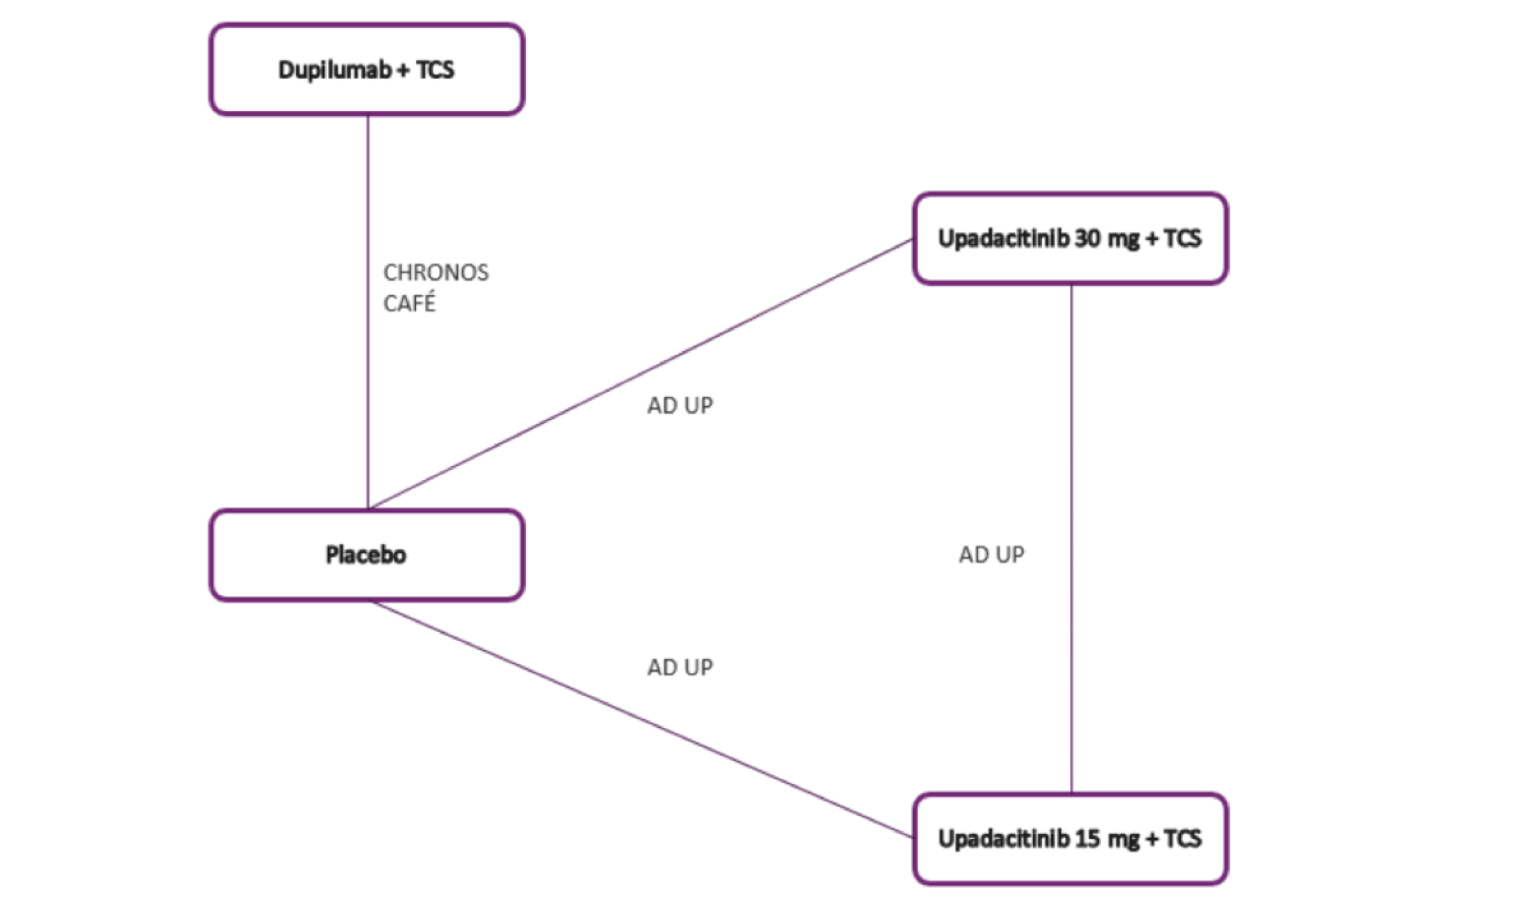 Network plot of included randomized controlled trials for monotherapy with dupilumab plus topical corticosteroids, upadacitinib 30 mg plus topical corticosteroids, upadacitinib 15 mg plus topical corticosteroids, and placebo, all connected.